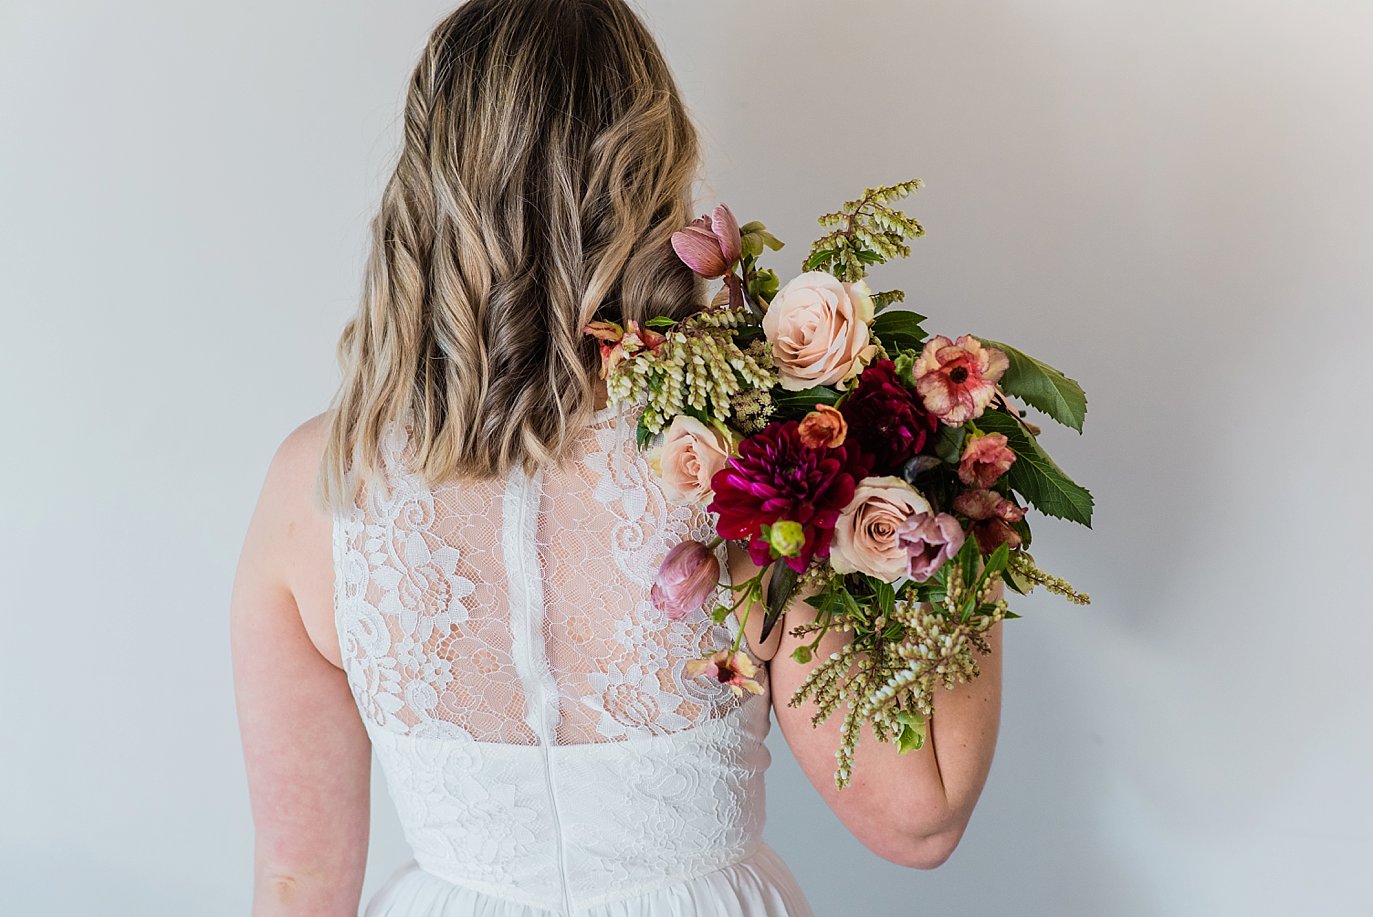 bride with lace dress and merlot and rose bridal bouquet at Northgate Event Center wedding by Westminster wedding photographer Jennie Crate